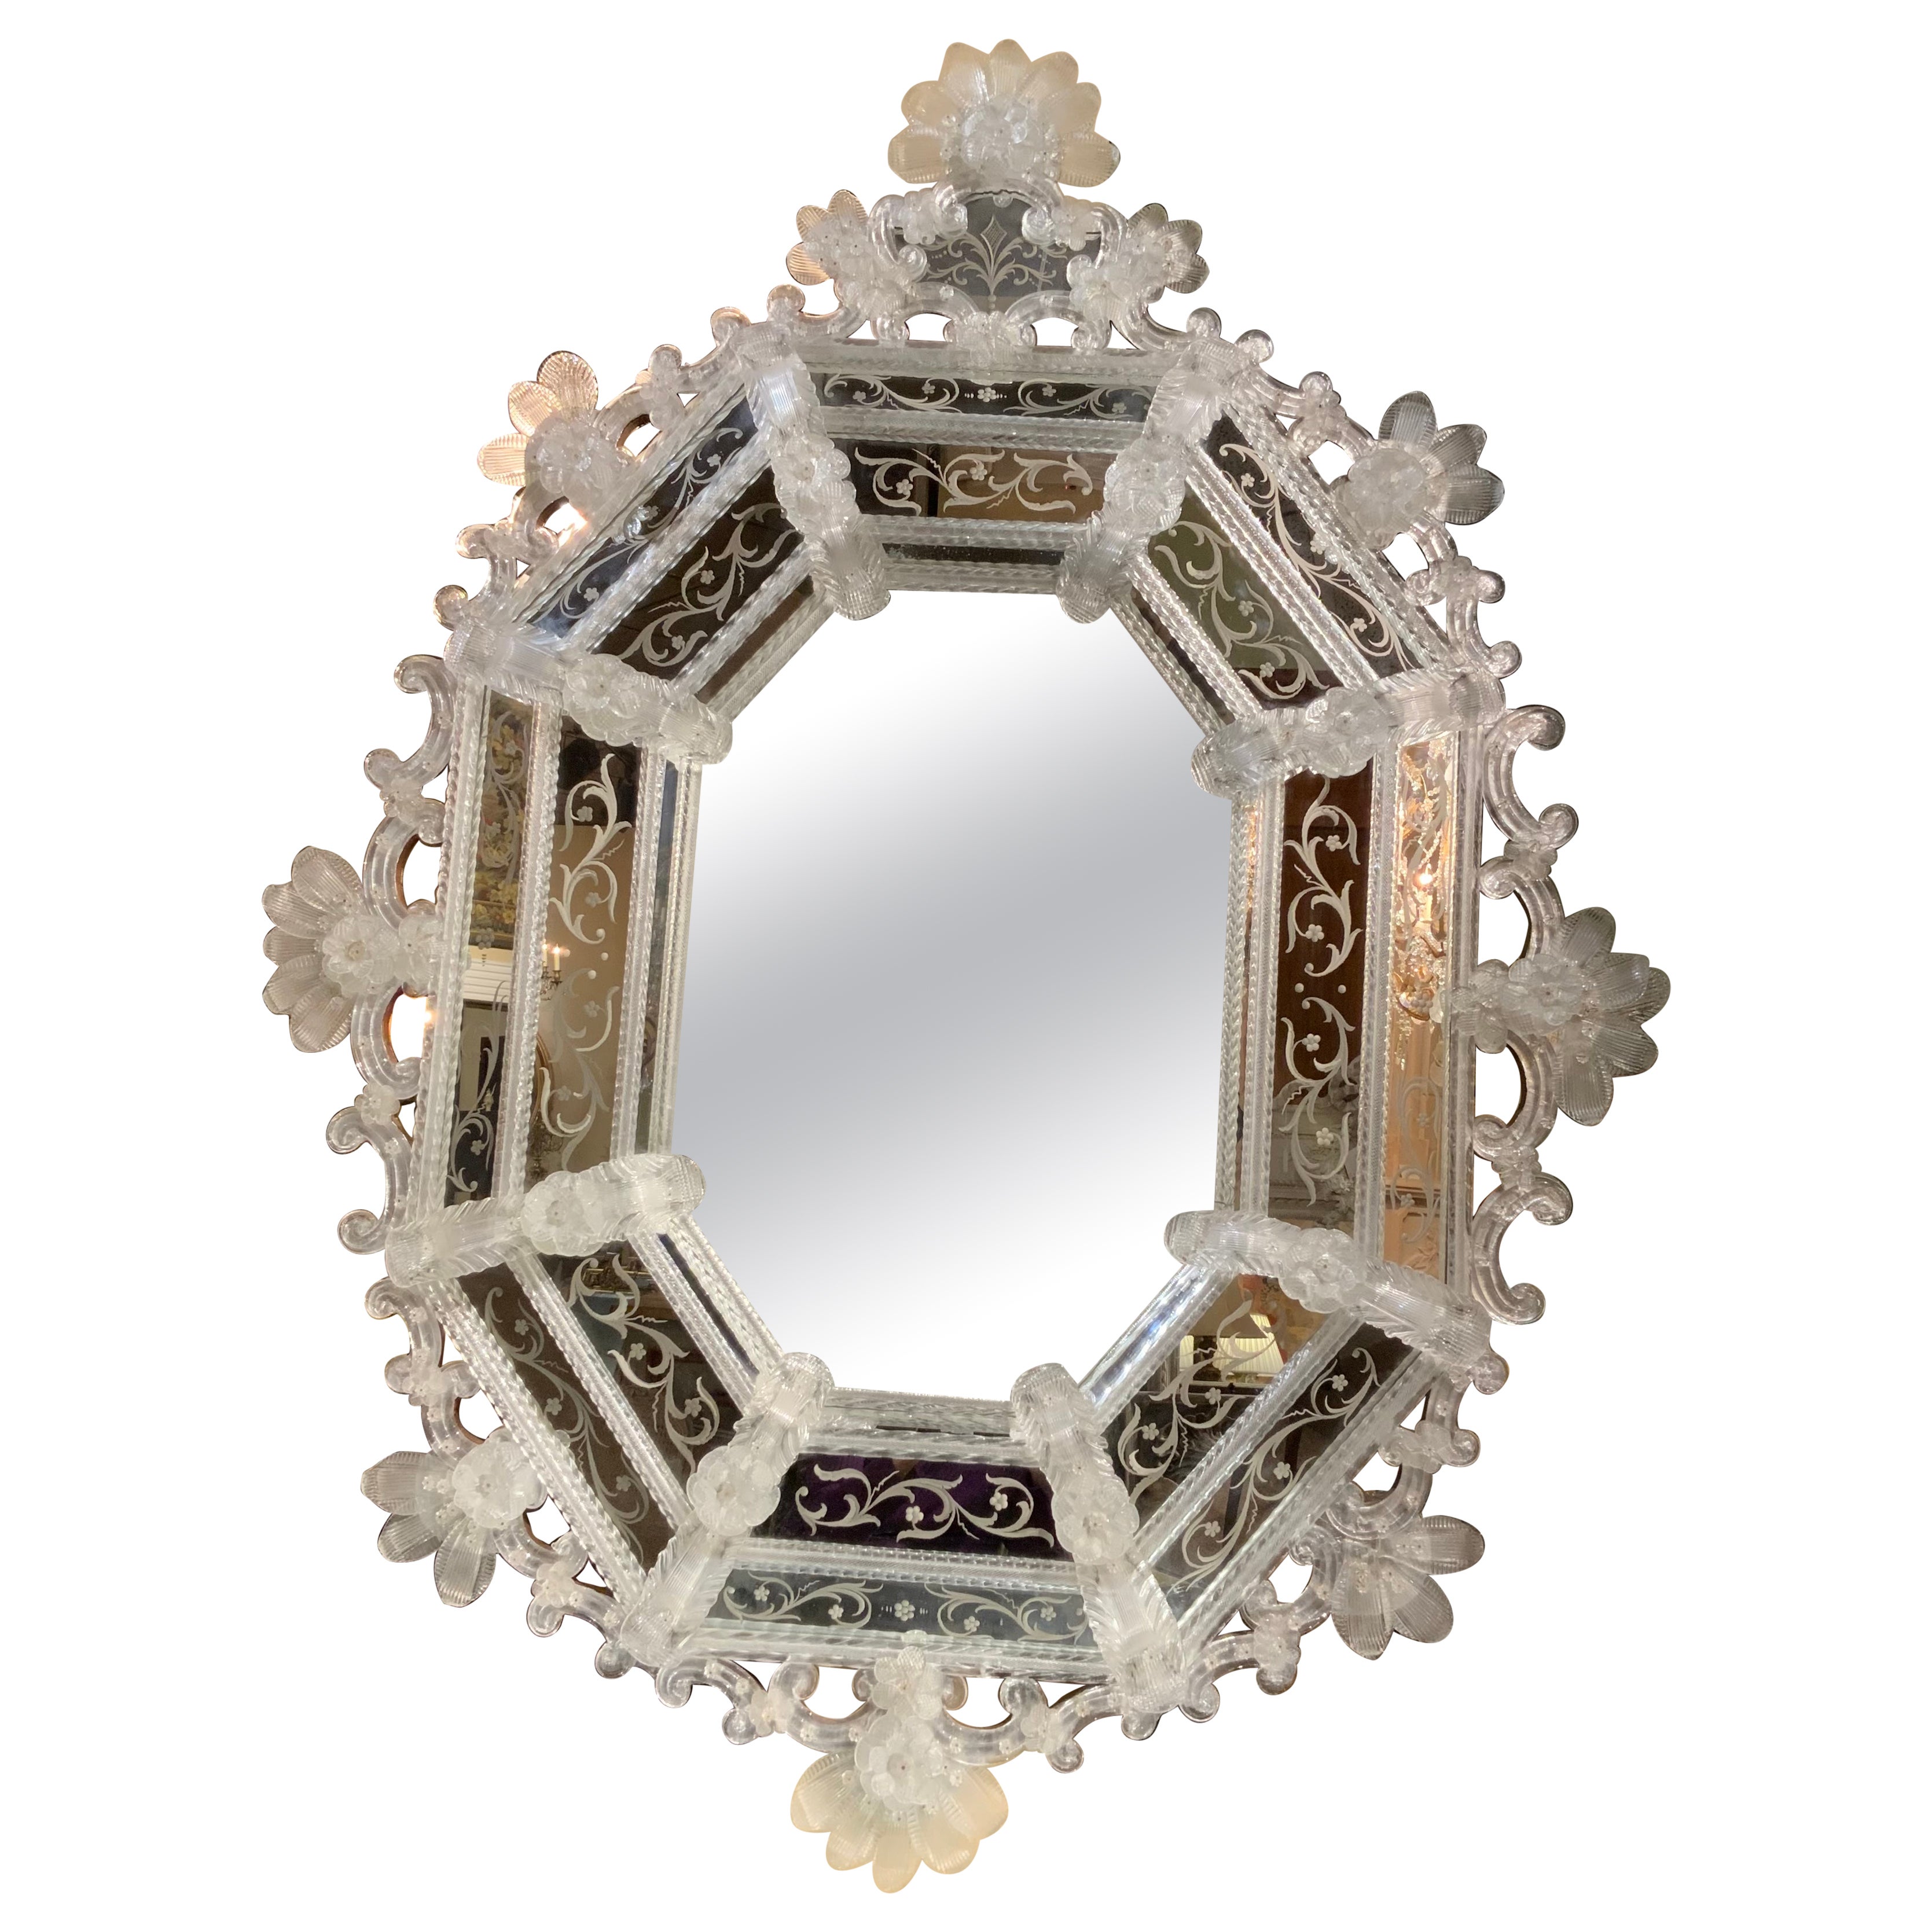 Large Venetian Wall Mirror with Ornate Etchings and Floral Decorations